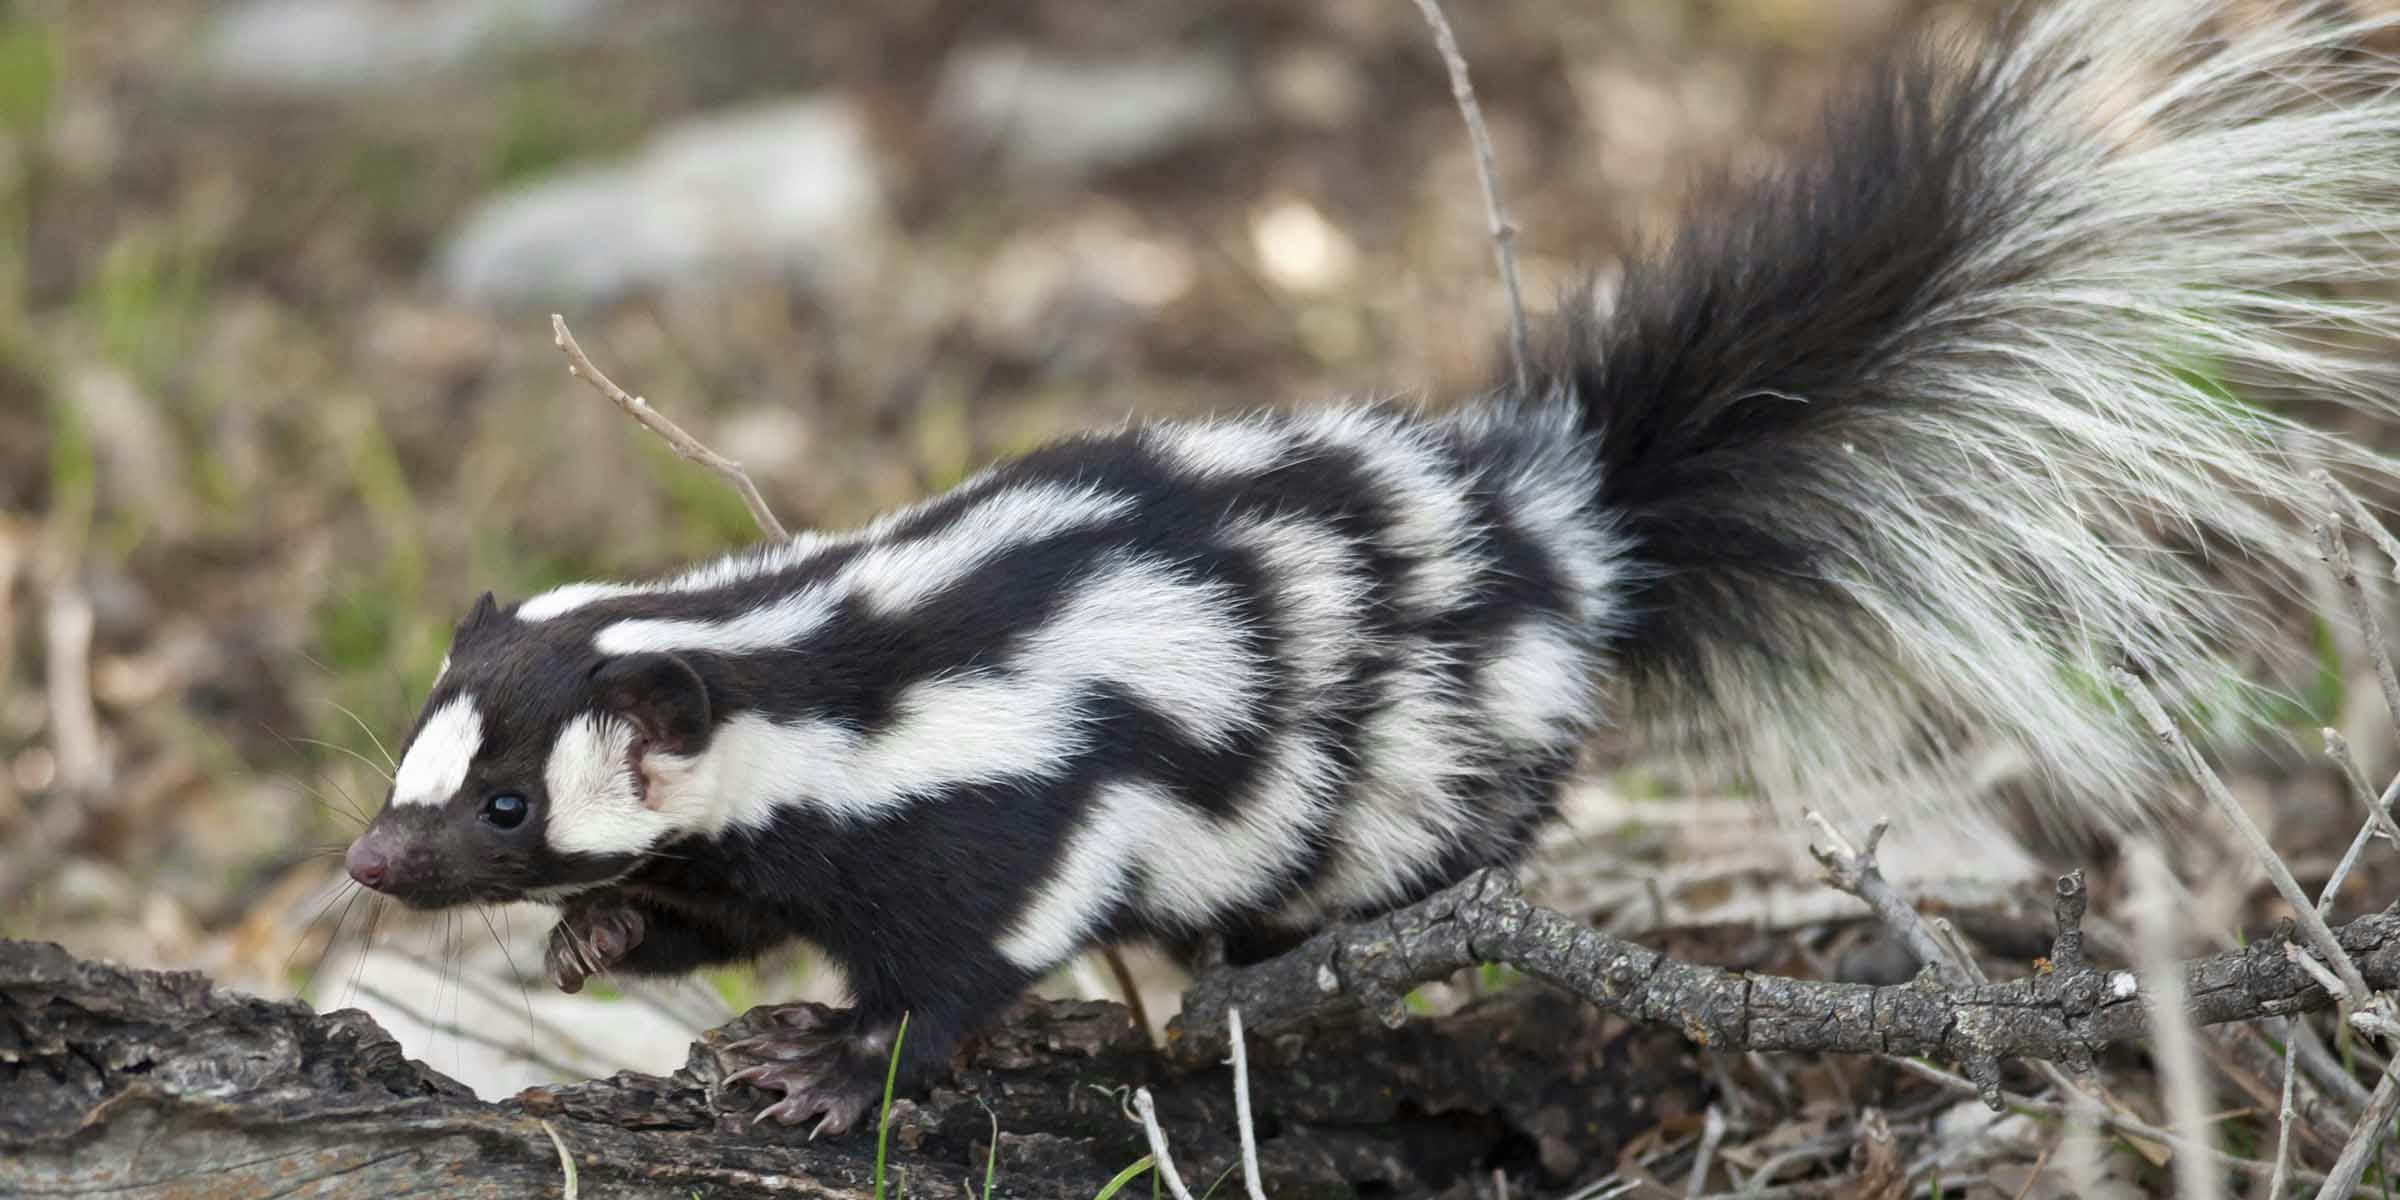 A skunk with a white zigzag pattern walking on a log